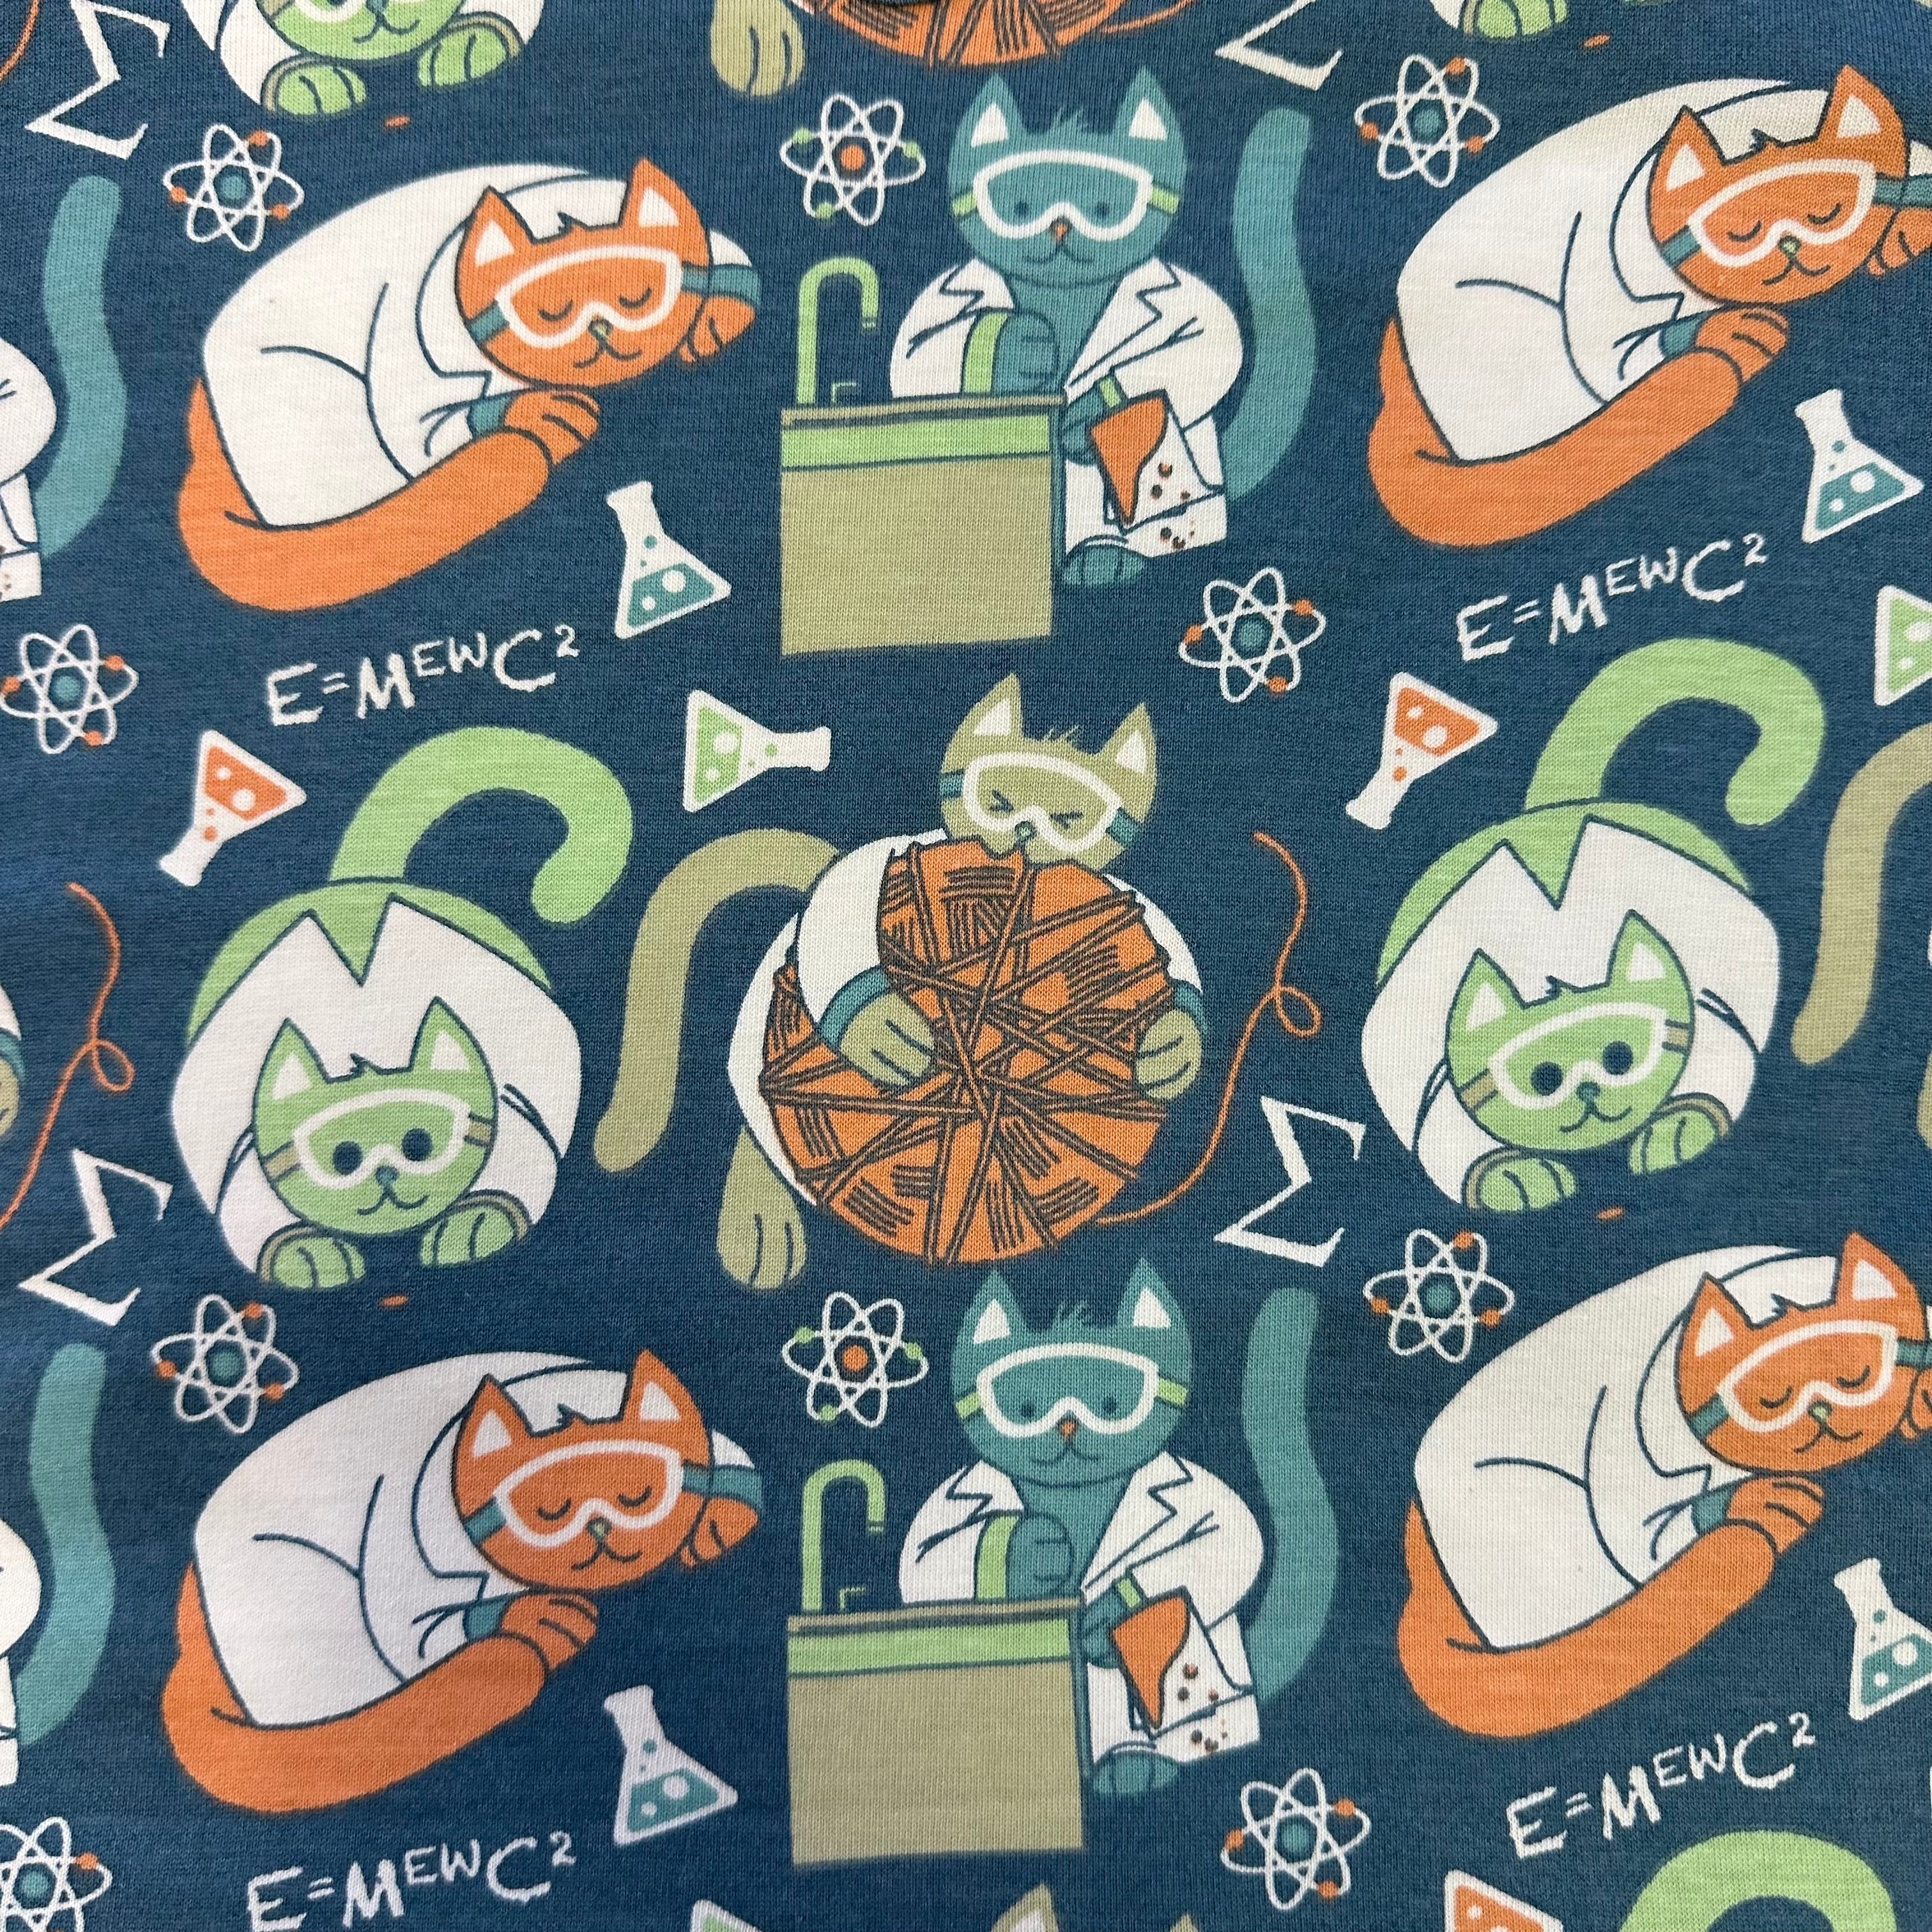 Science Cats A-Line Dress (With Waist Seam)